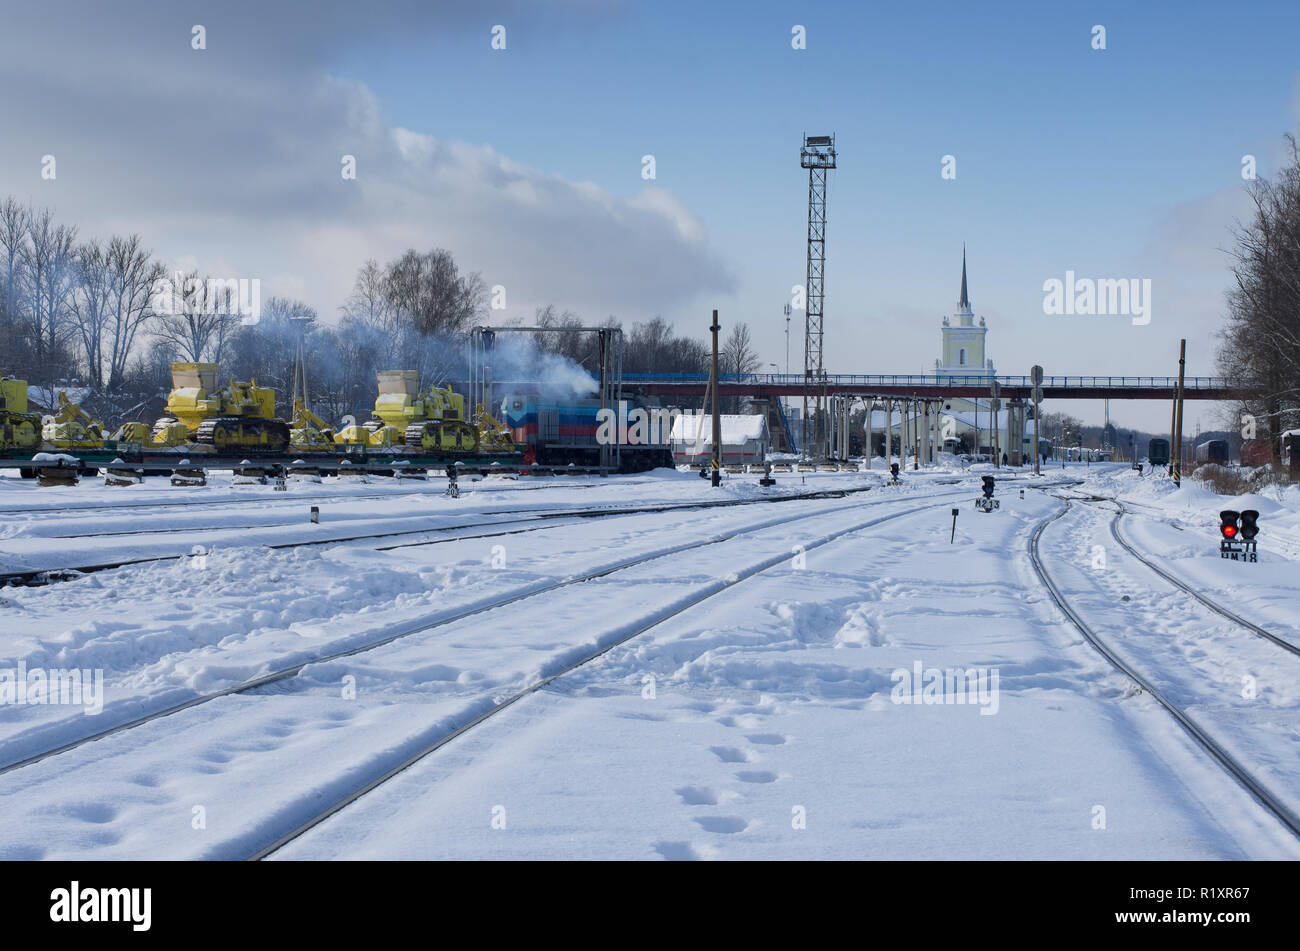 Snow-covered major railway hub in winter time (city of Dno, Russia) Stock Photo